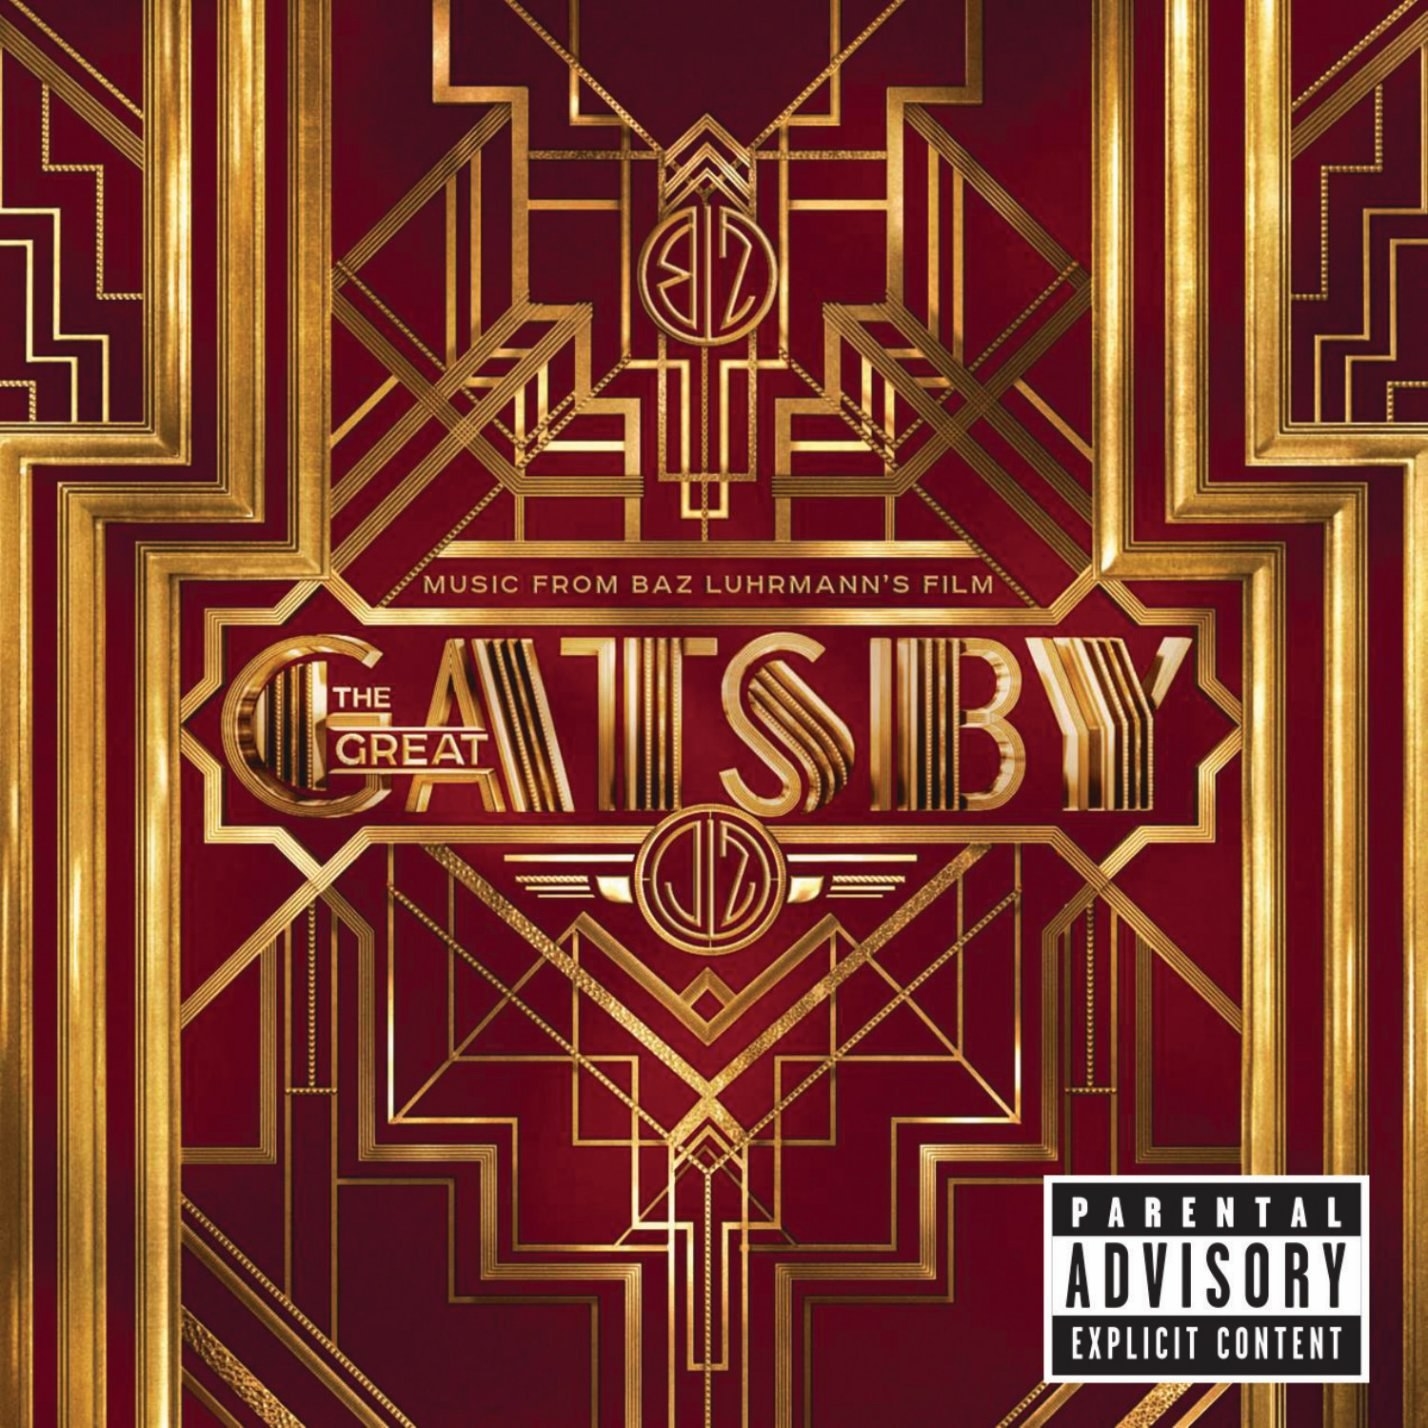 The album cover for The Great Gatsby